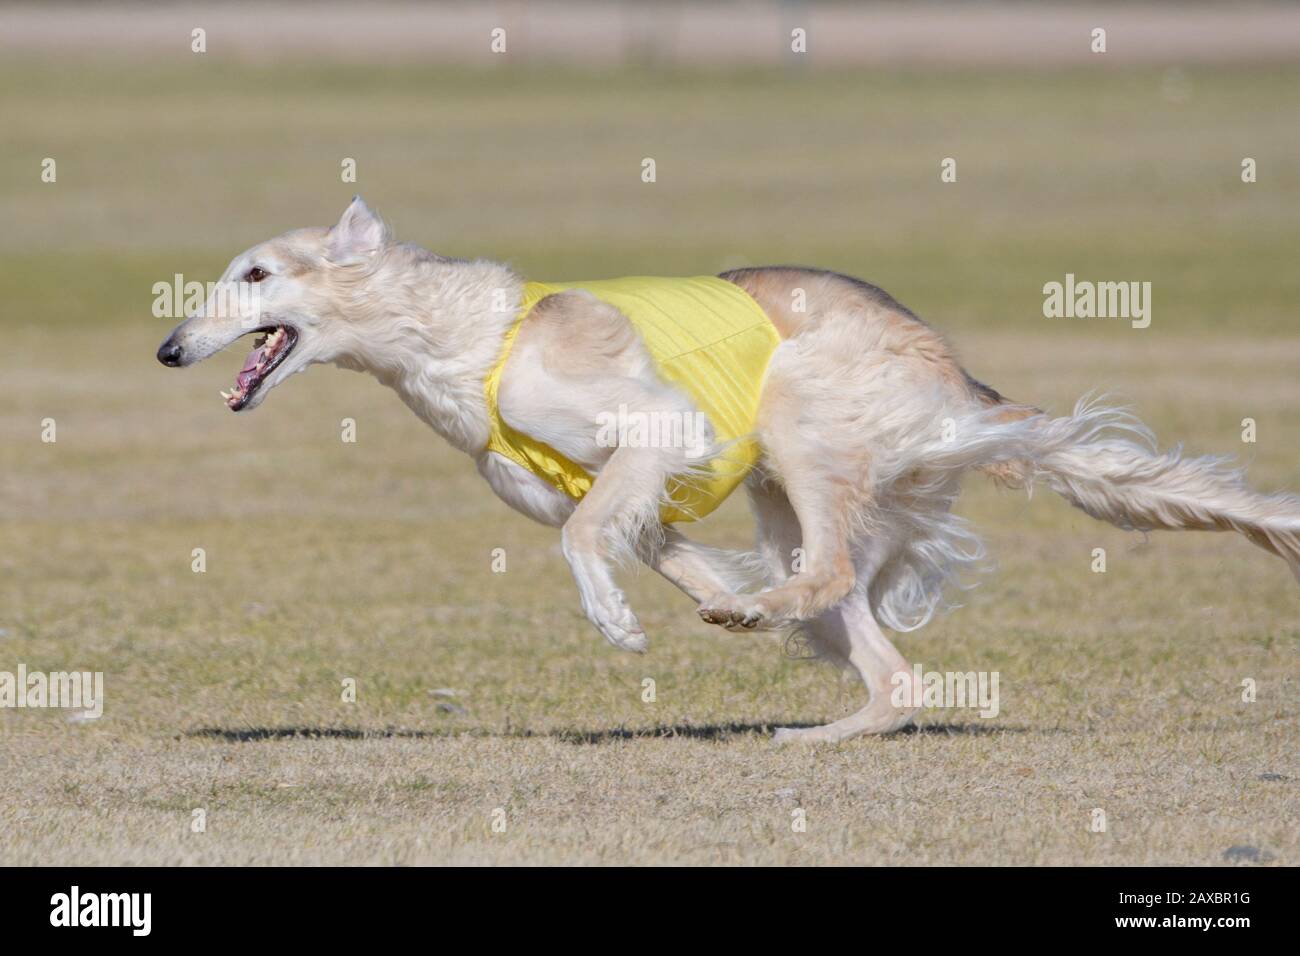 https://c8.alamy.com/comp/2AXBR1G/sight-hound-russian-borzoi-chasing-a-lure-on-a-testing-course-2AXBR1G.jpg